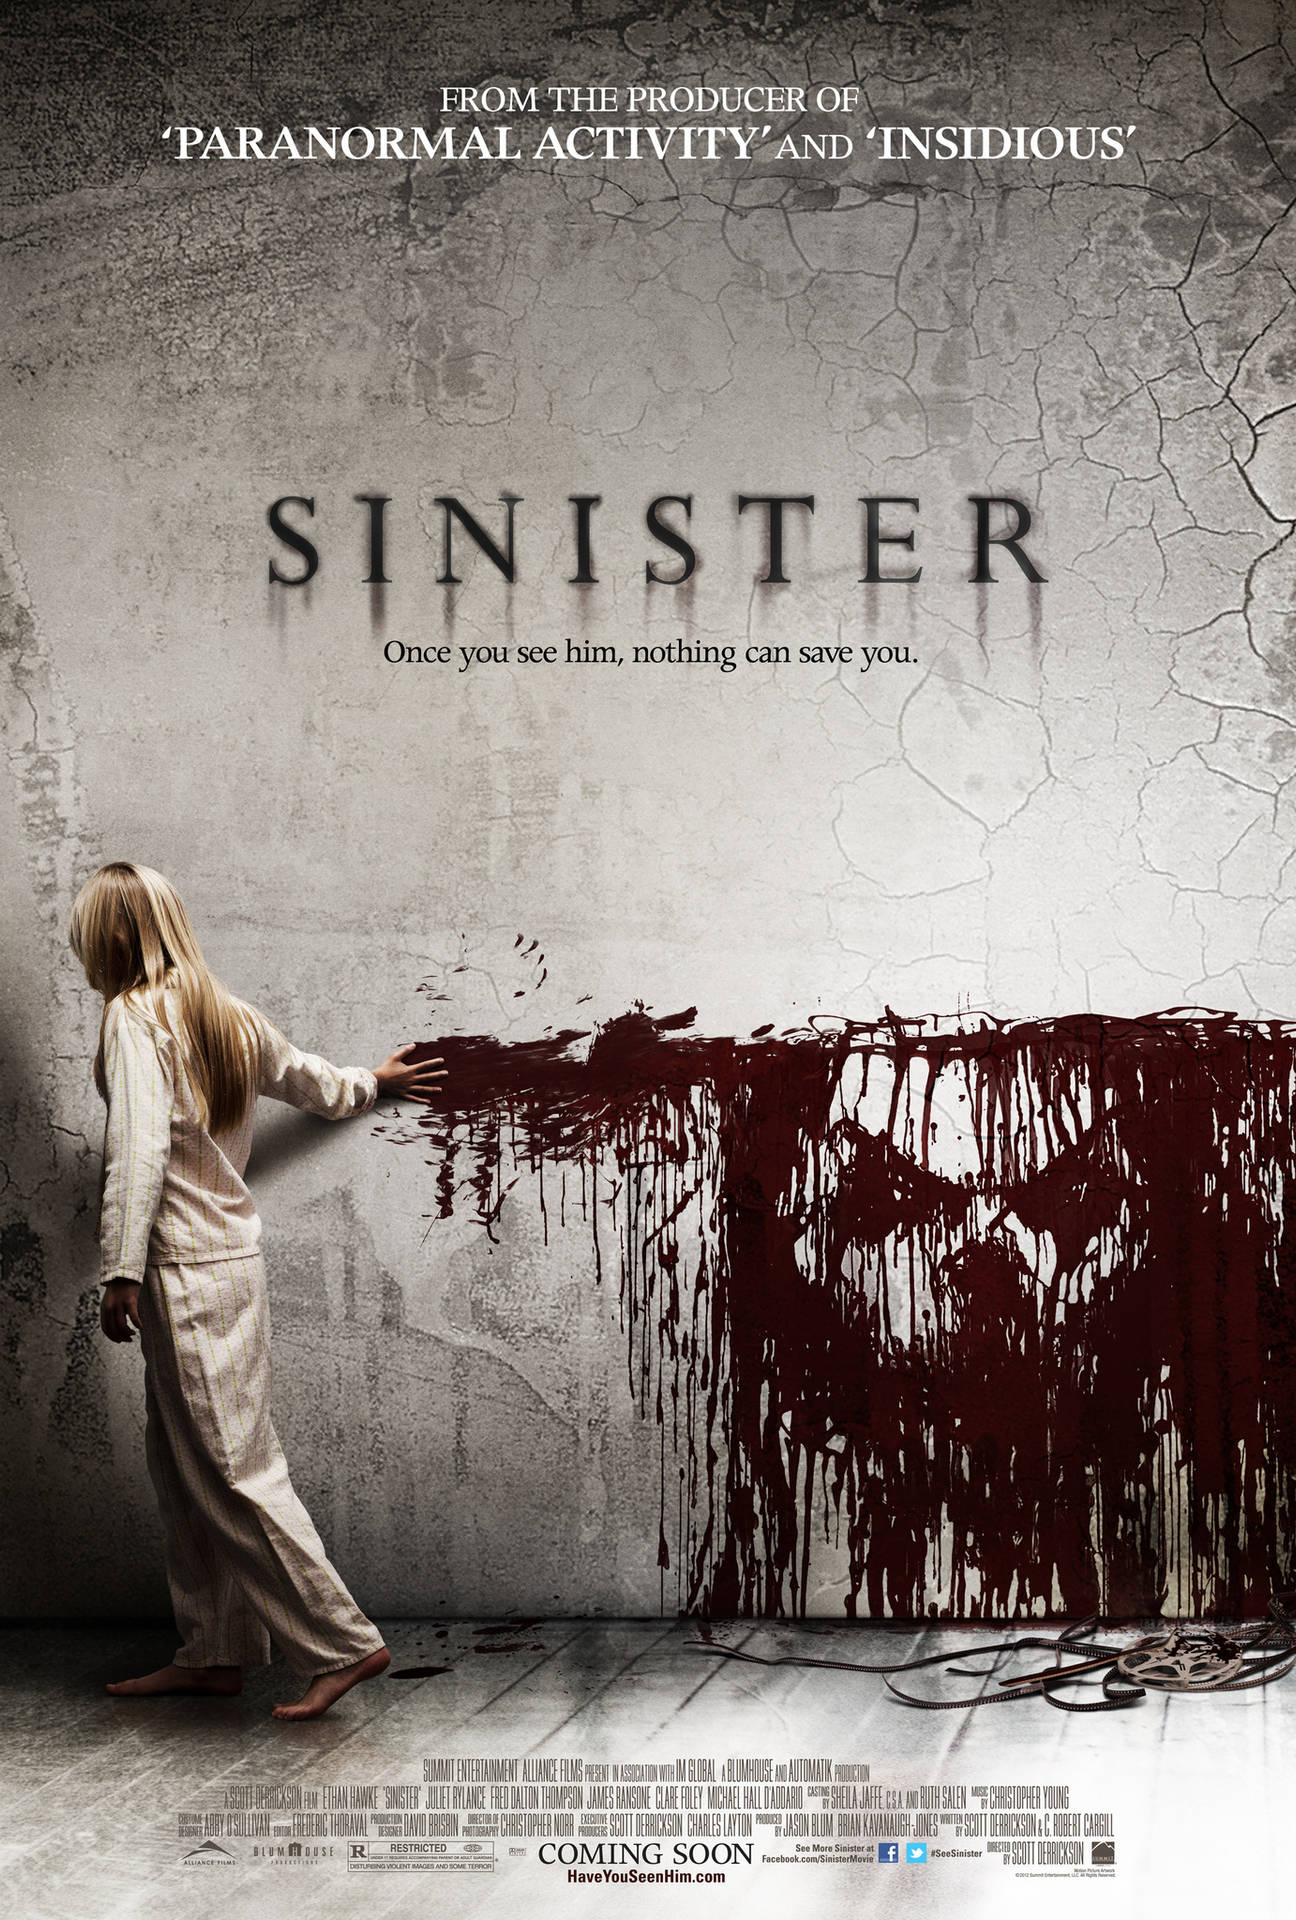 Sinister (2012) Official Movie Poster